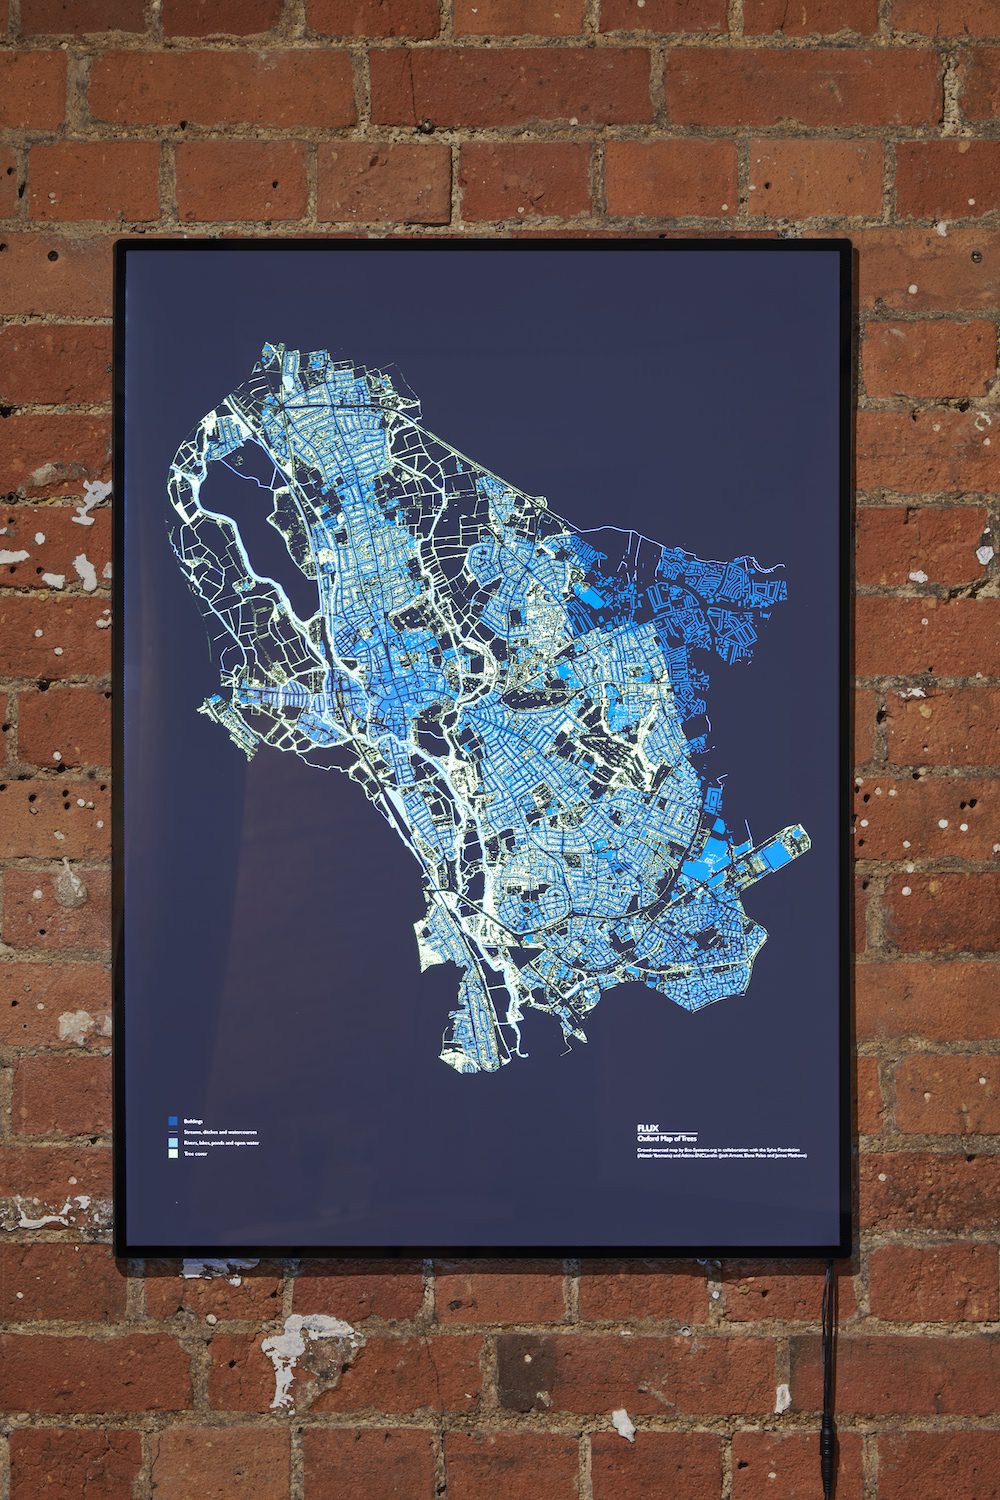 Framed map on a brick wall. It is an aerial map of Oxford is in shades of blue and green.